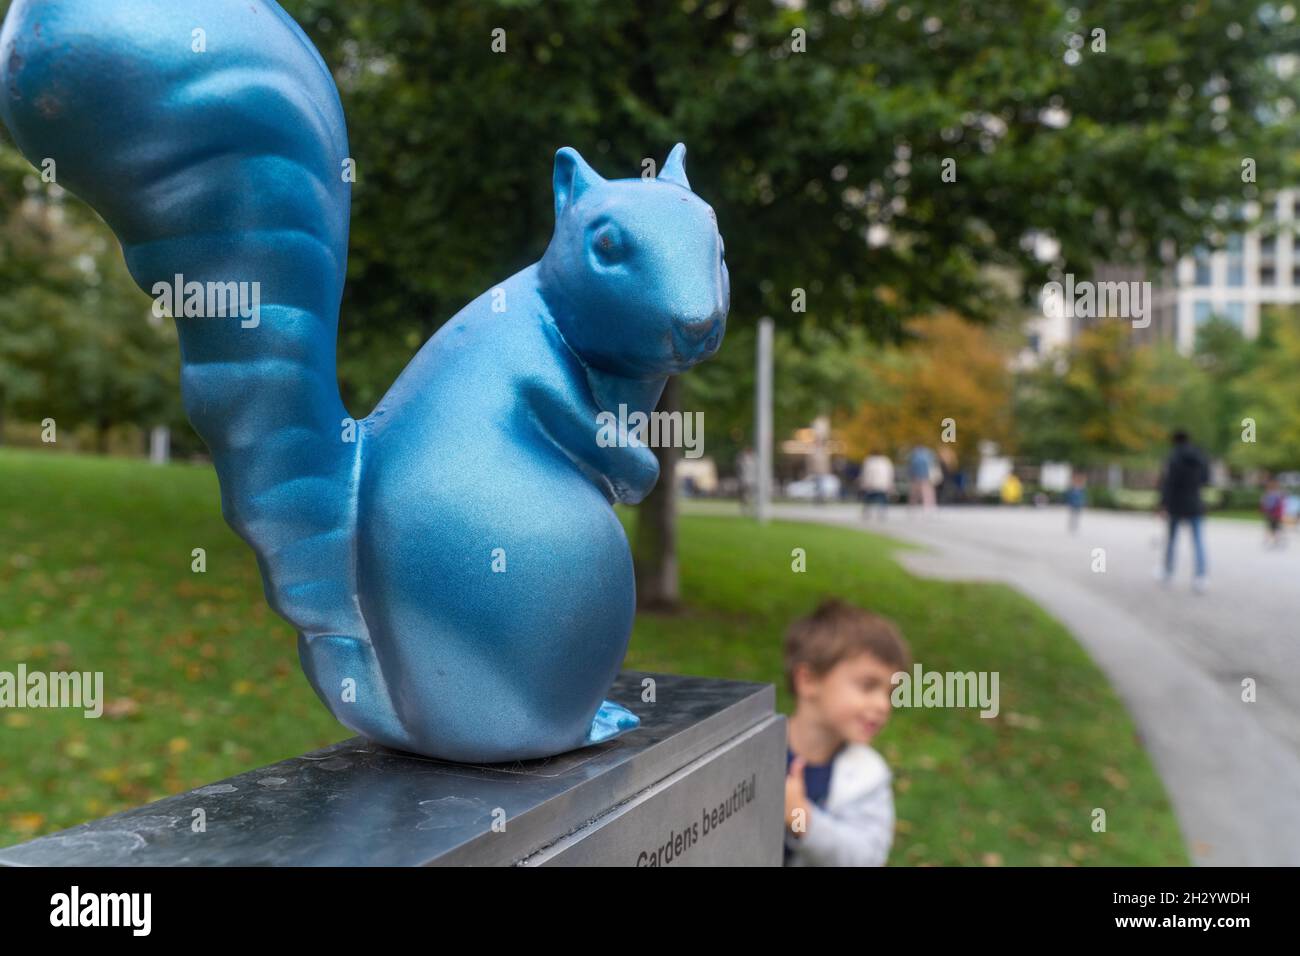 Blue squirrel sculpture sitting on contactless donation point in Jubilee Gardens, South bank, London, England Stock Photo